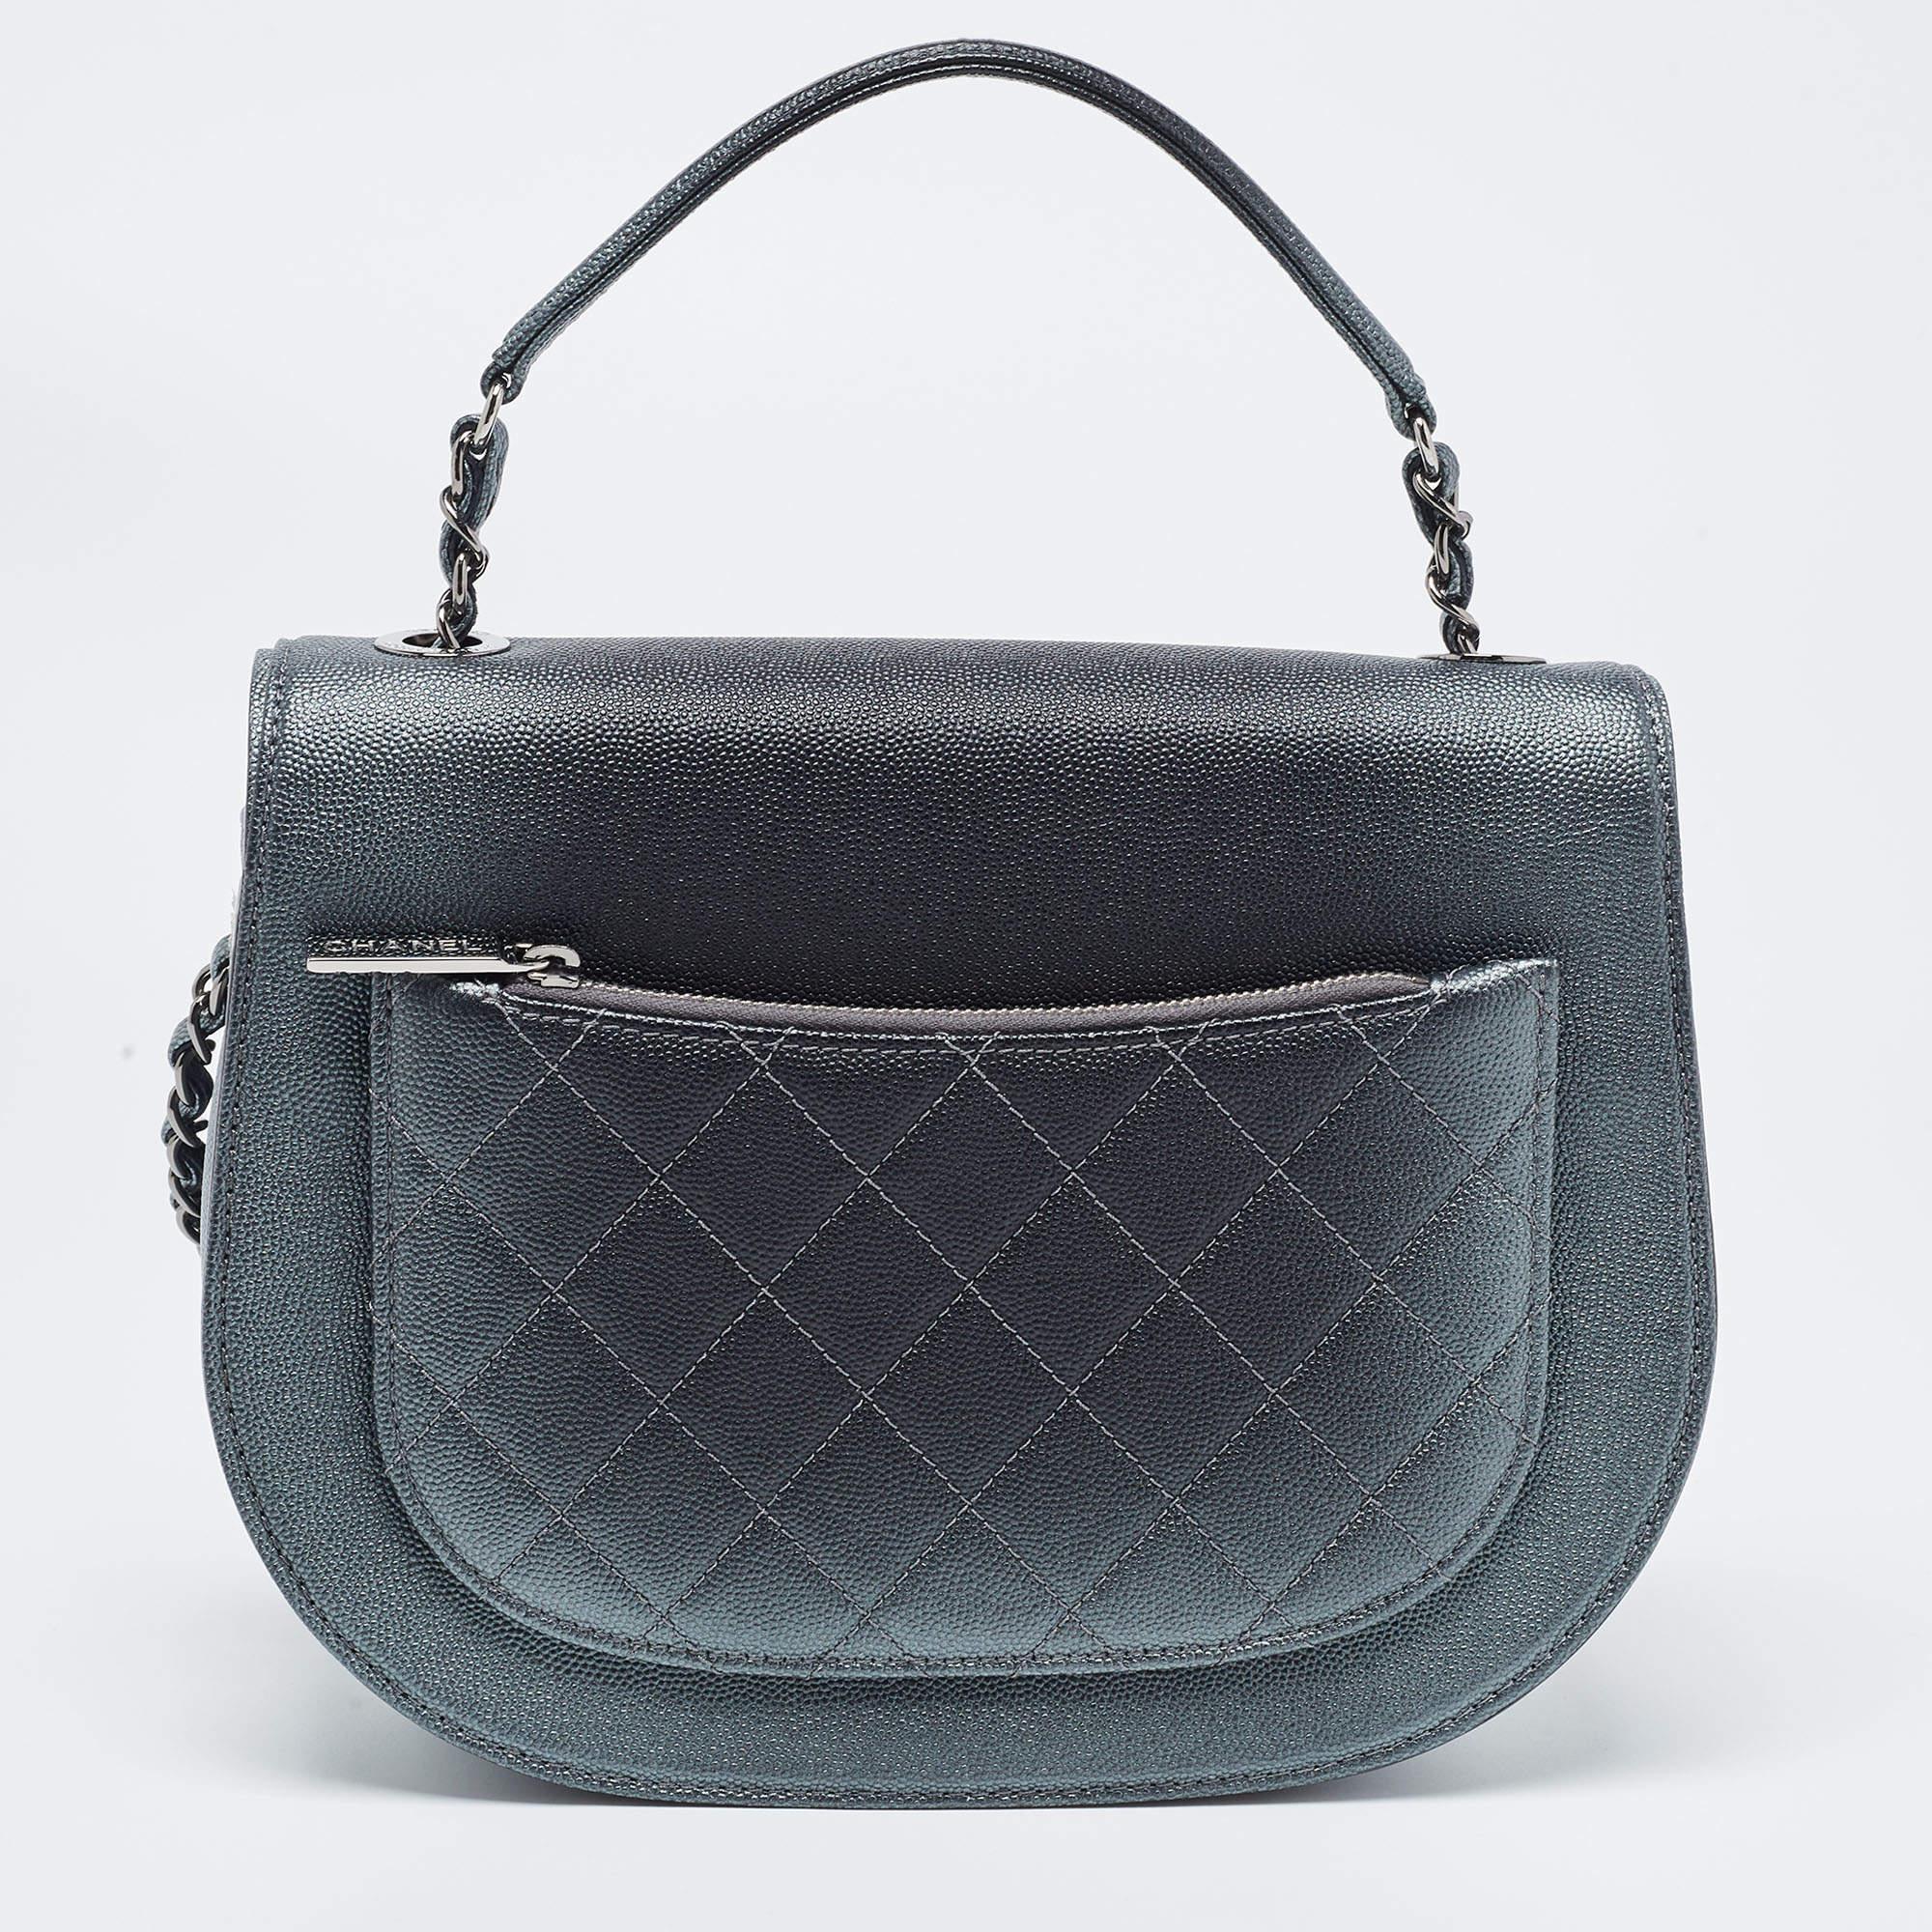 Chanel Metallic Grey Ombre Quilted Caviar Leather Coco Curve Flap Bag 4